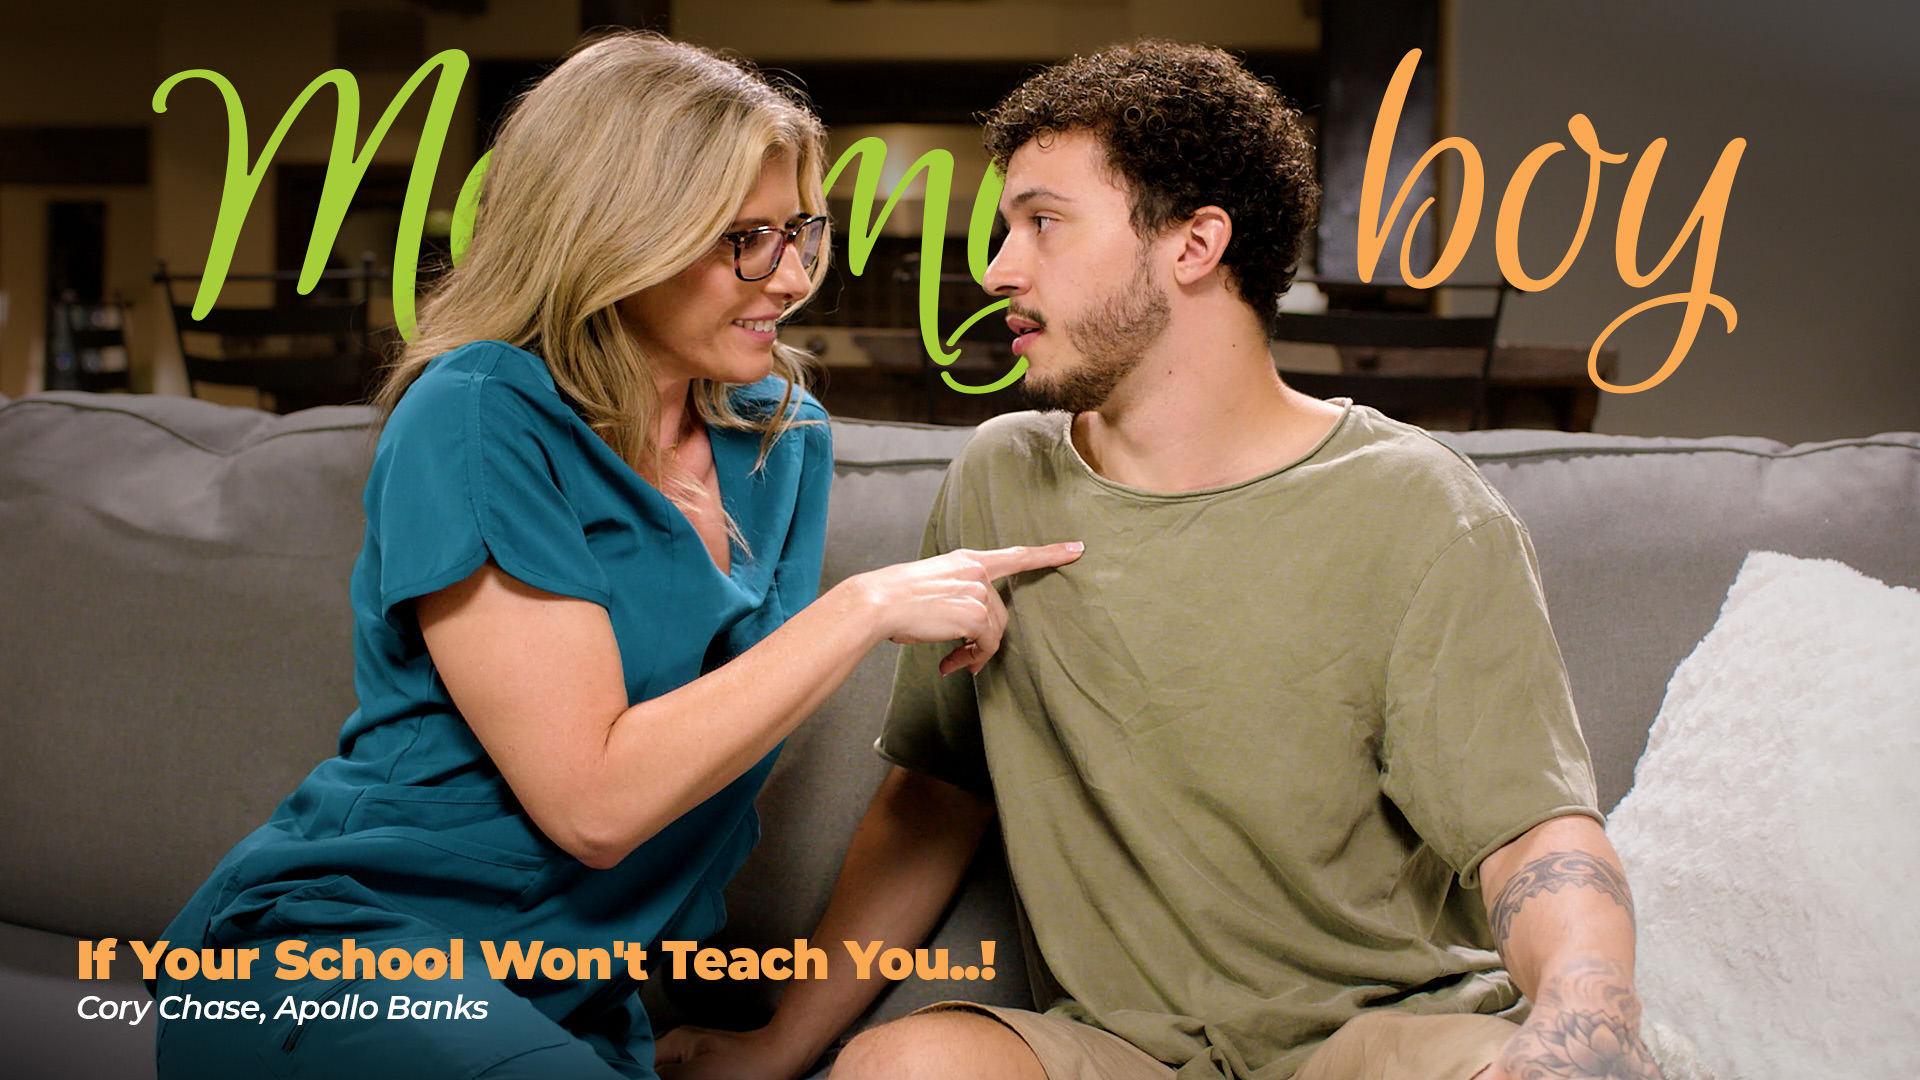 Cory Chase, Apollo Banks “If Your School Won’t Teach You..!” MommysBoy